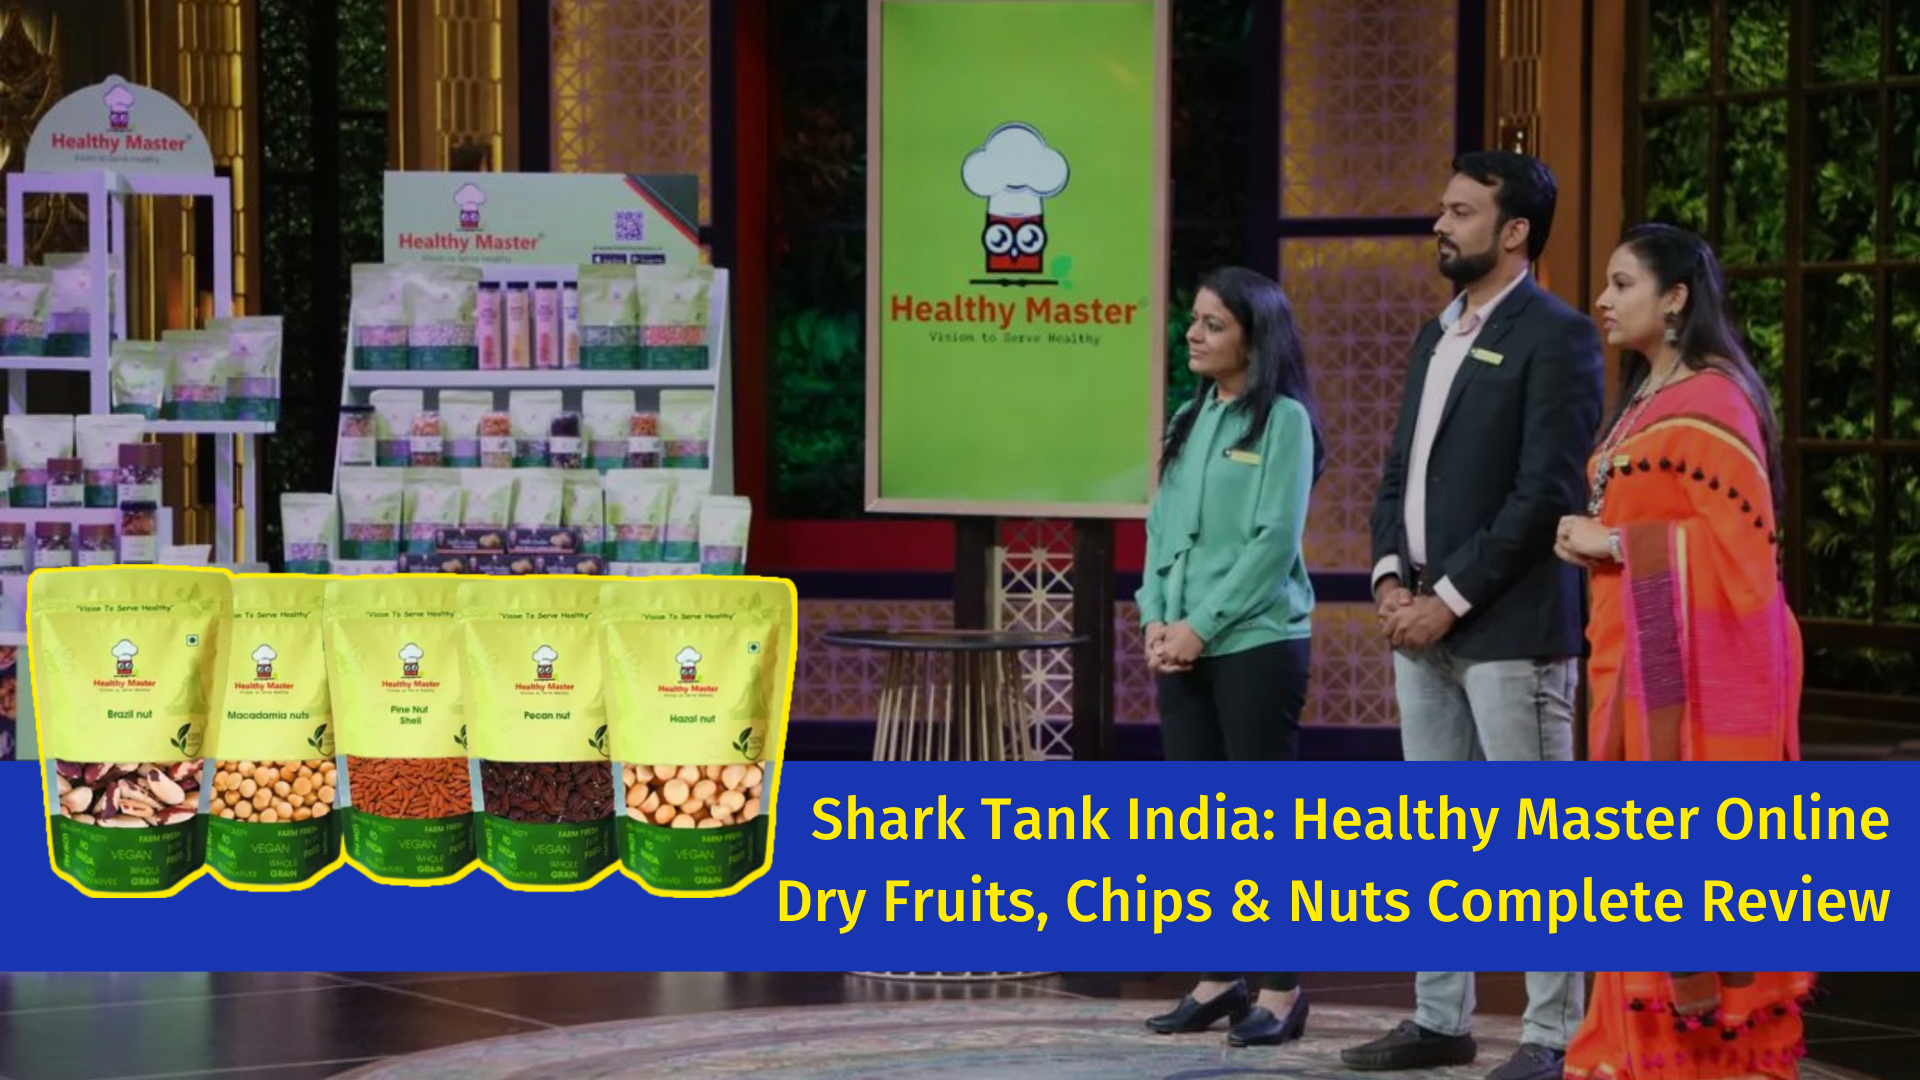 Shark Tank India: Healthy Master Online Dry Fruits, Chips & Nuts Complete Review